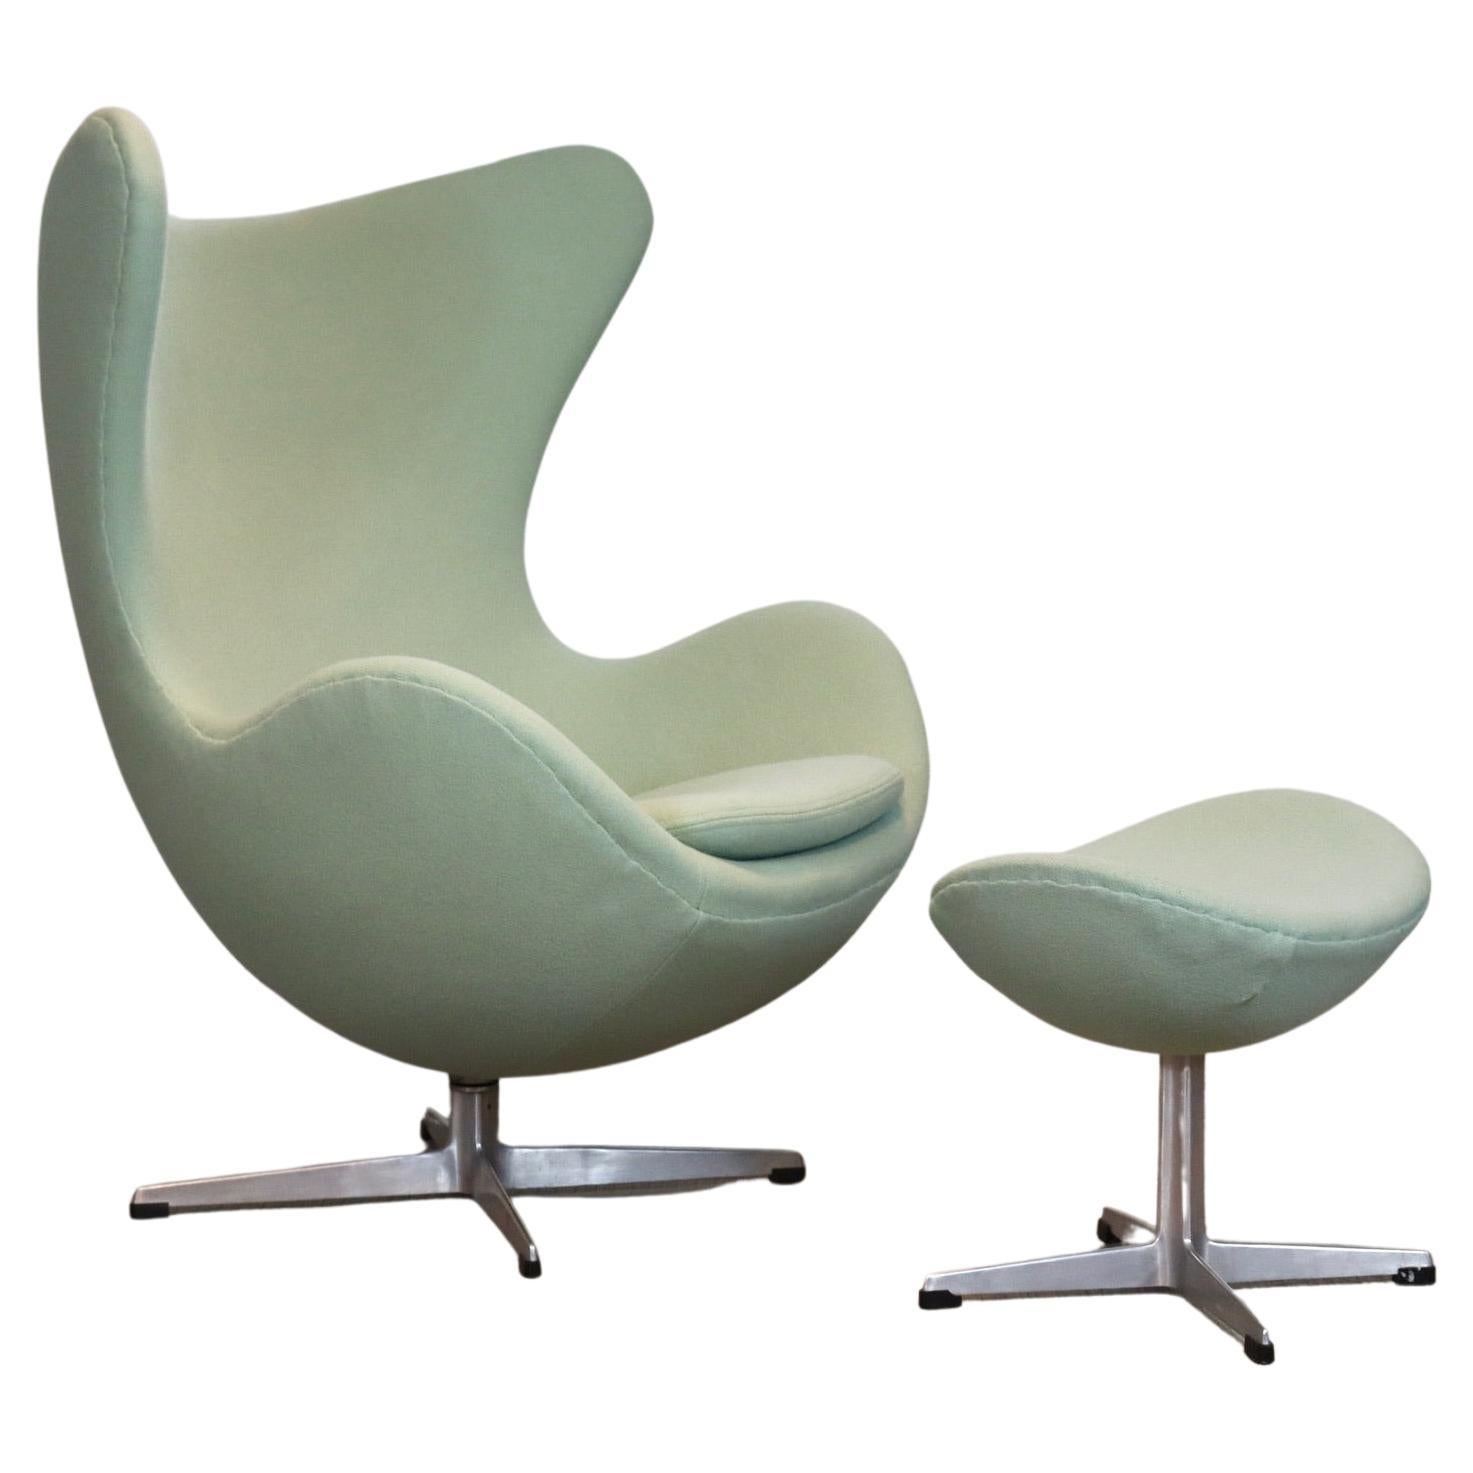 Early Edition Egg Chair with Ottoman by Arne Jacobsen for Fritz Hansen, 1960s